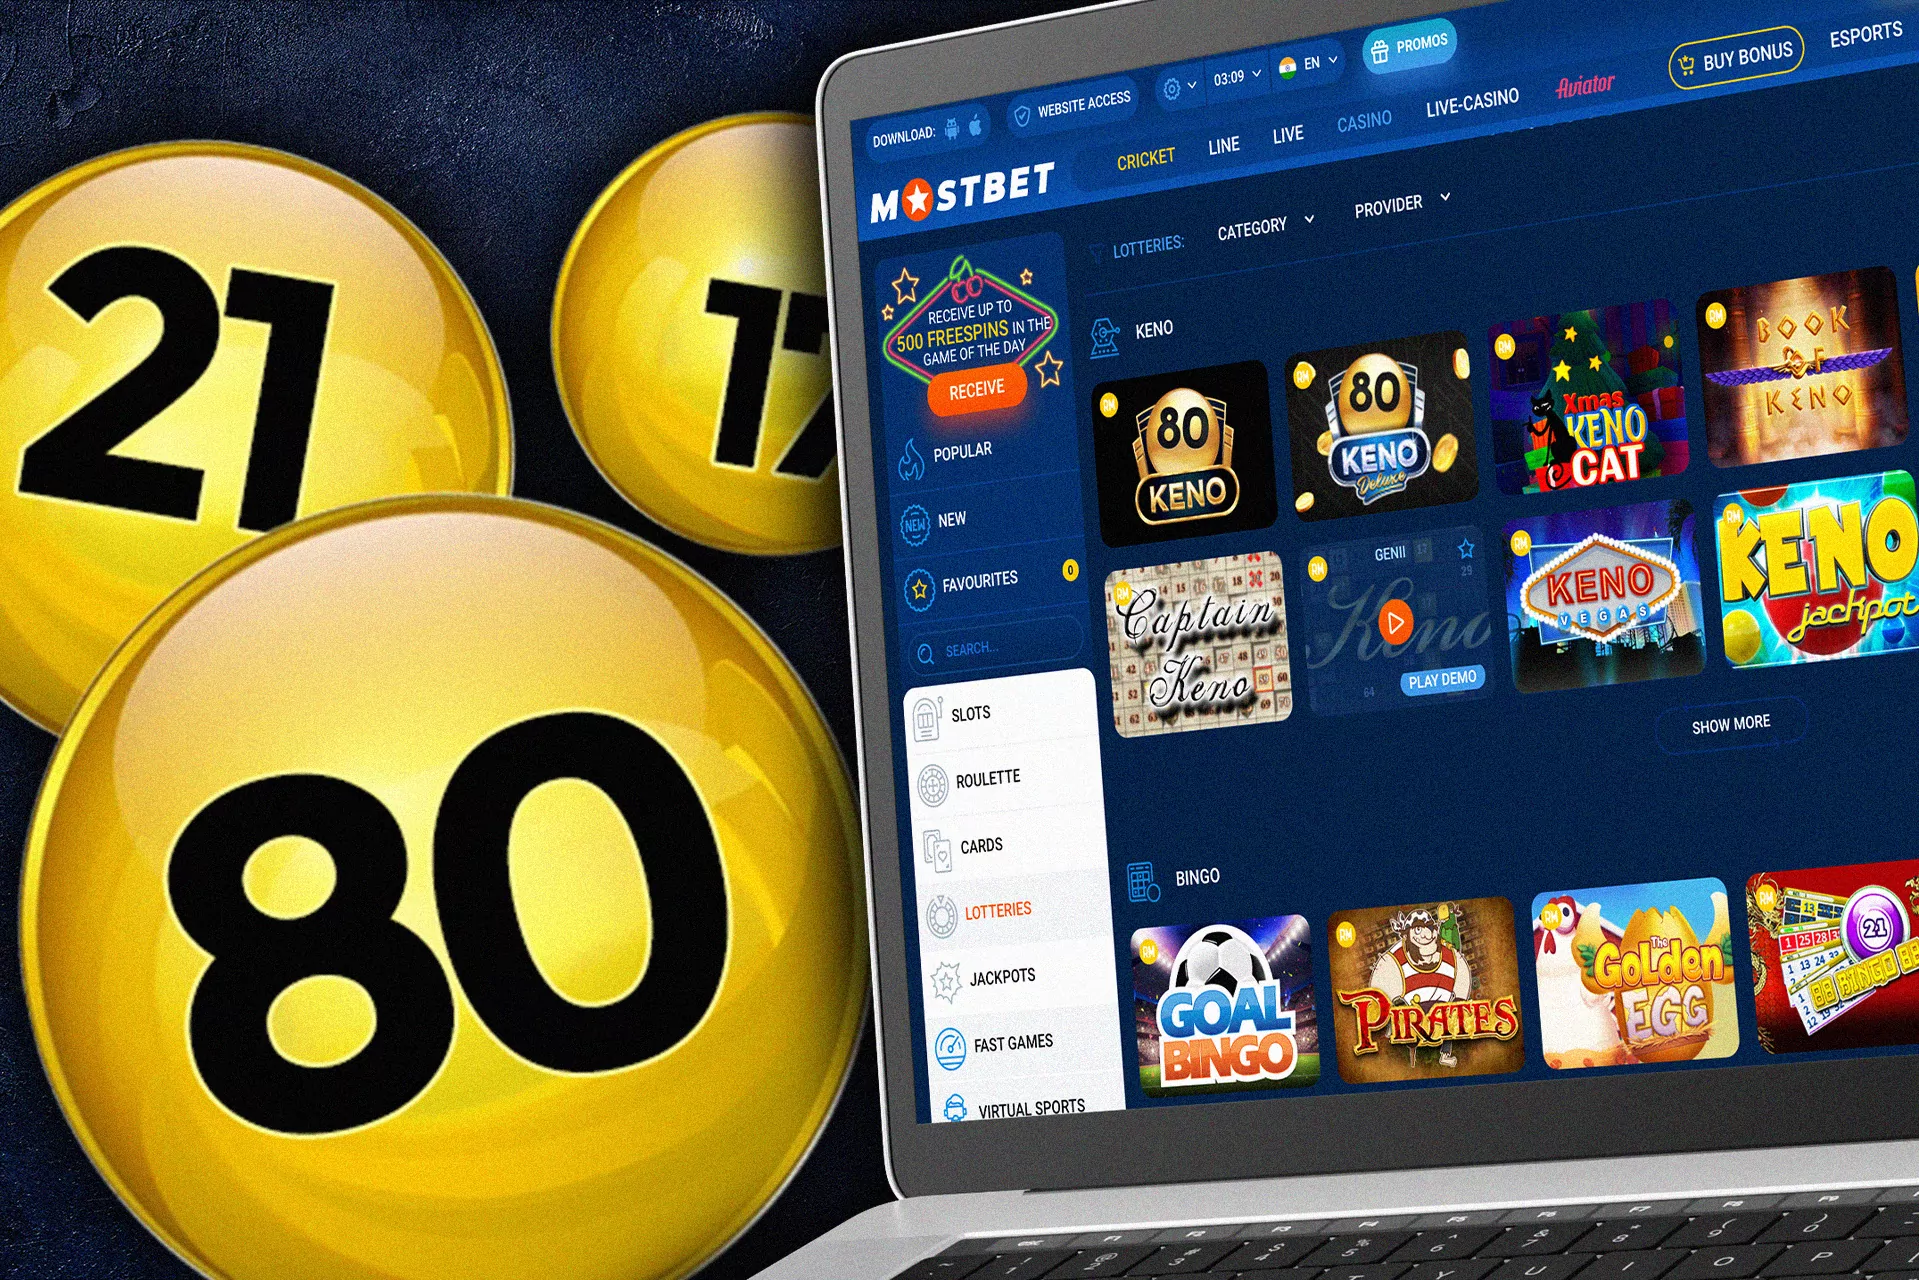 Play the lottery on the Mostbet website, look for matches and try to win the big prize.